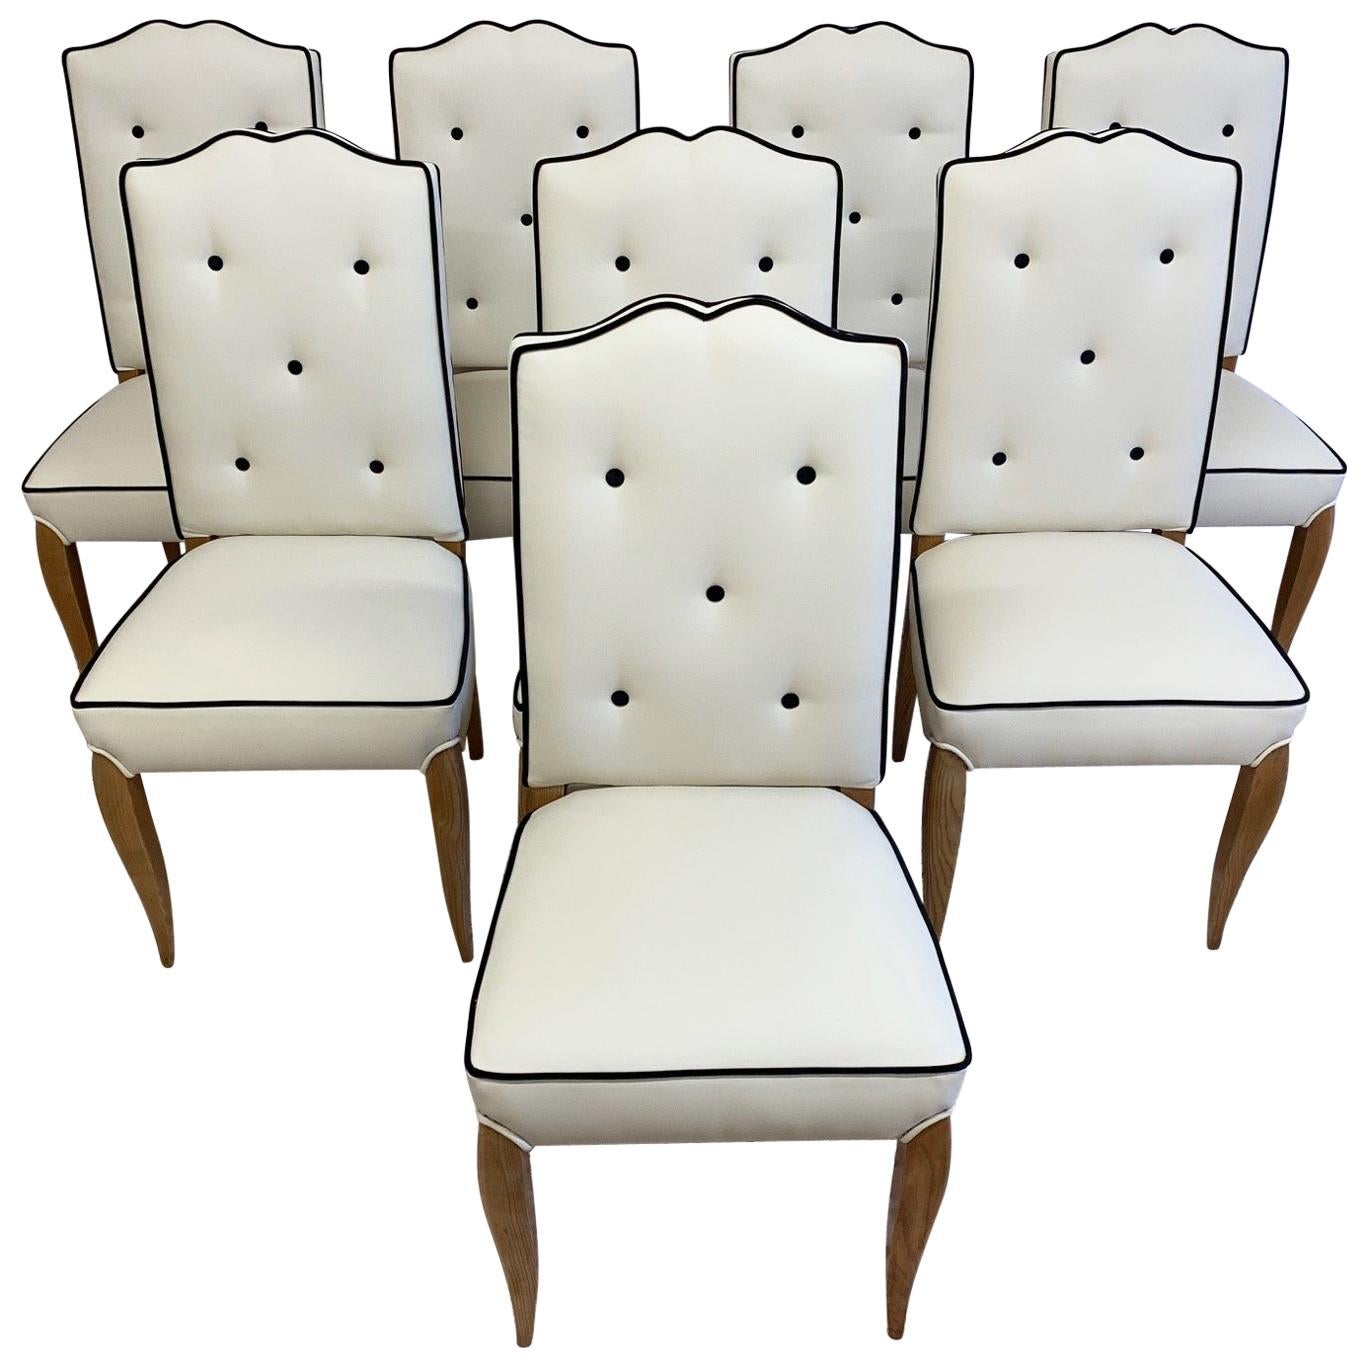 Set of 8 French Art Deco Durmast Dining Chairs, 1930s